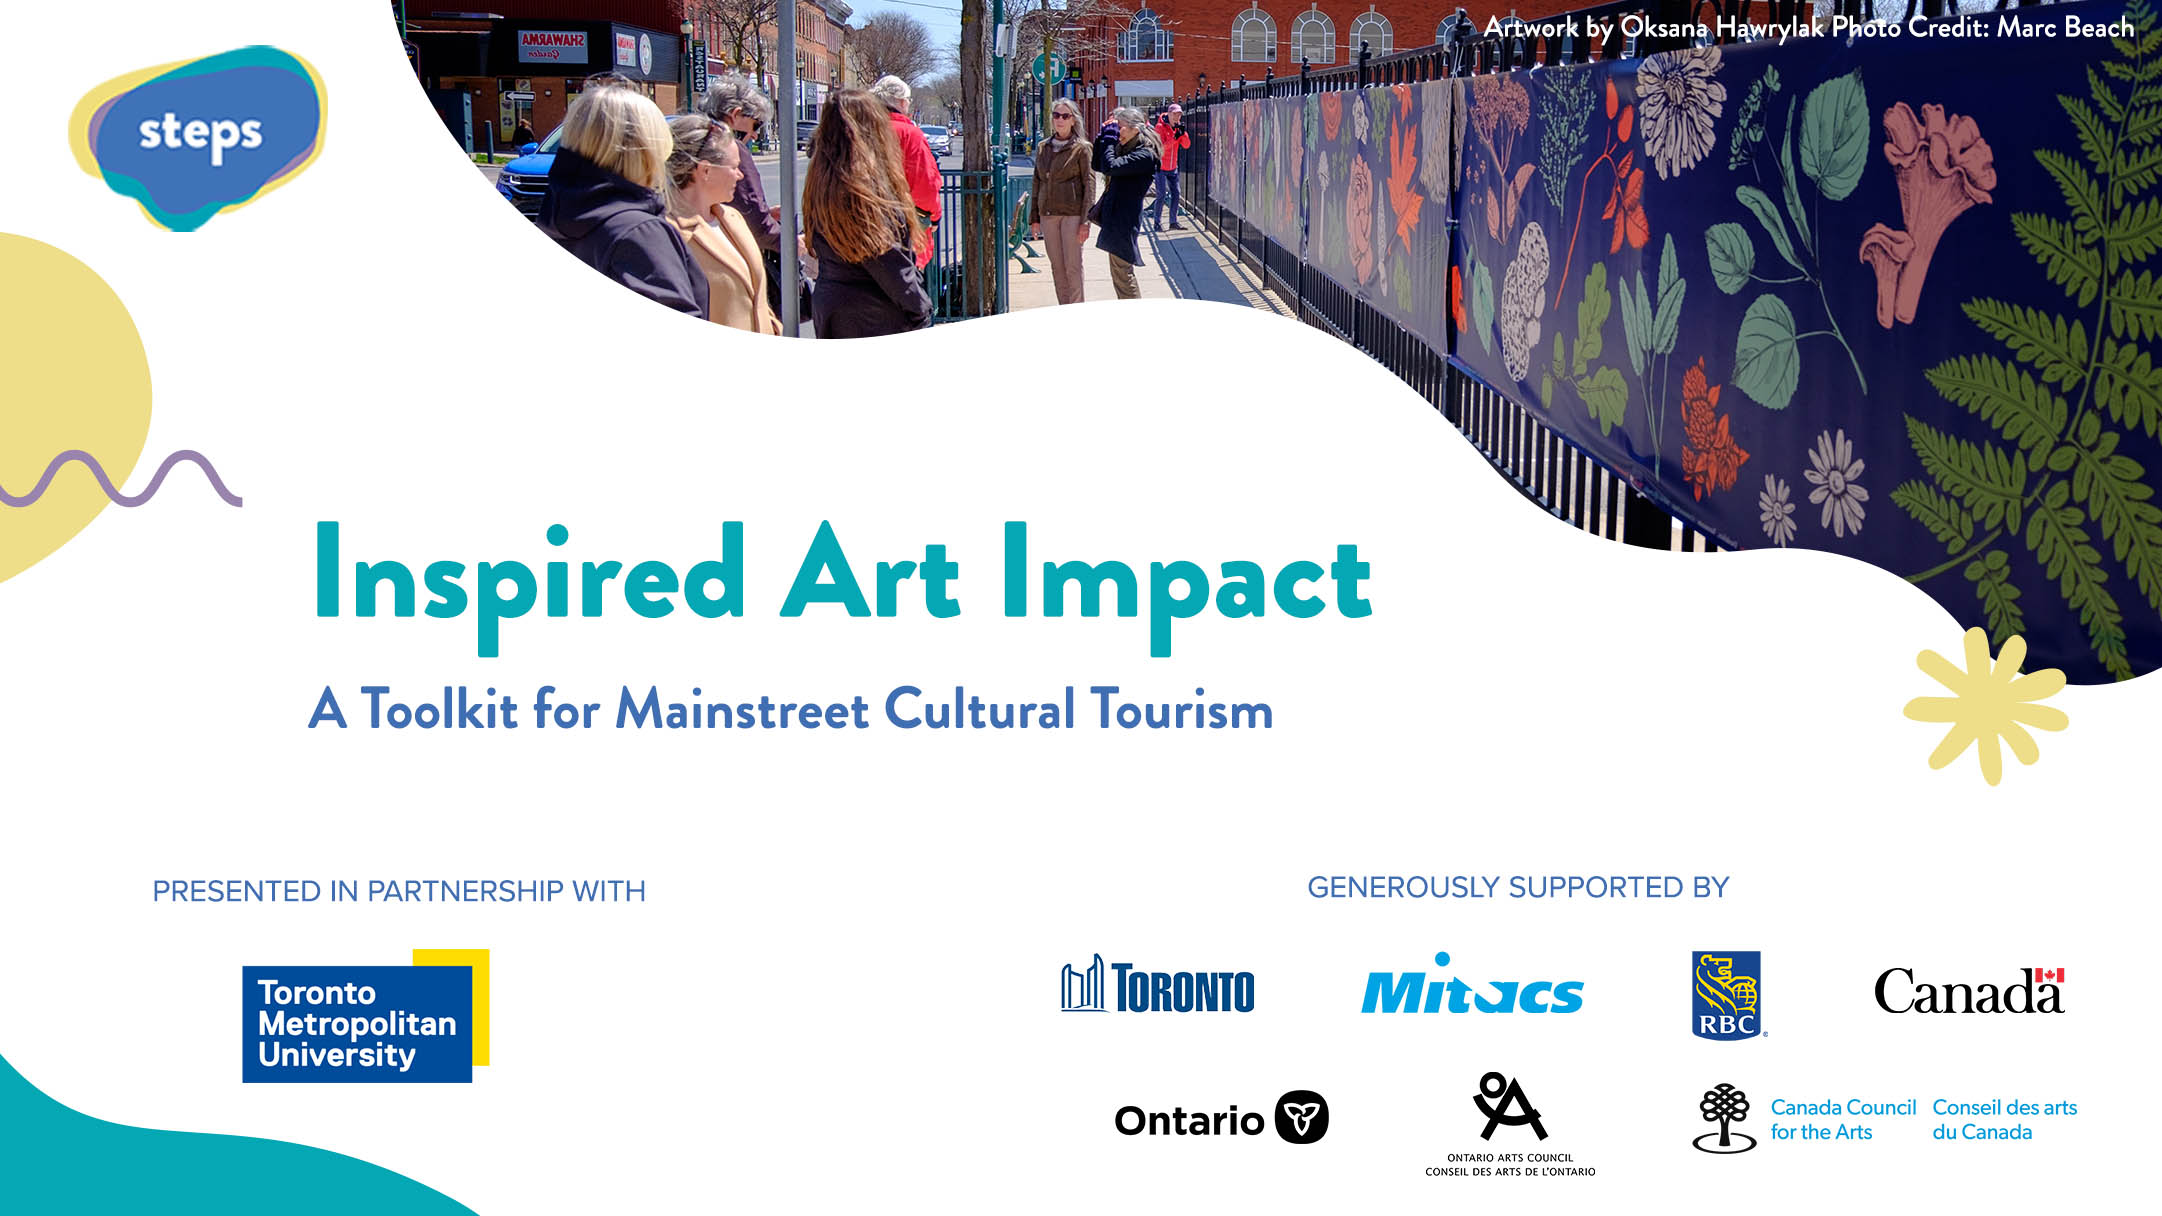 A banner reads "Inspired Art Impact: A Toolkit for Mainstreet Cultural Tourism"